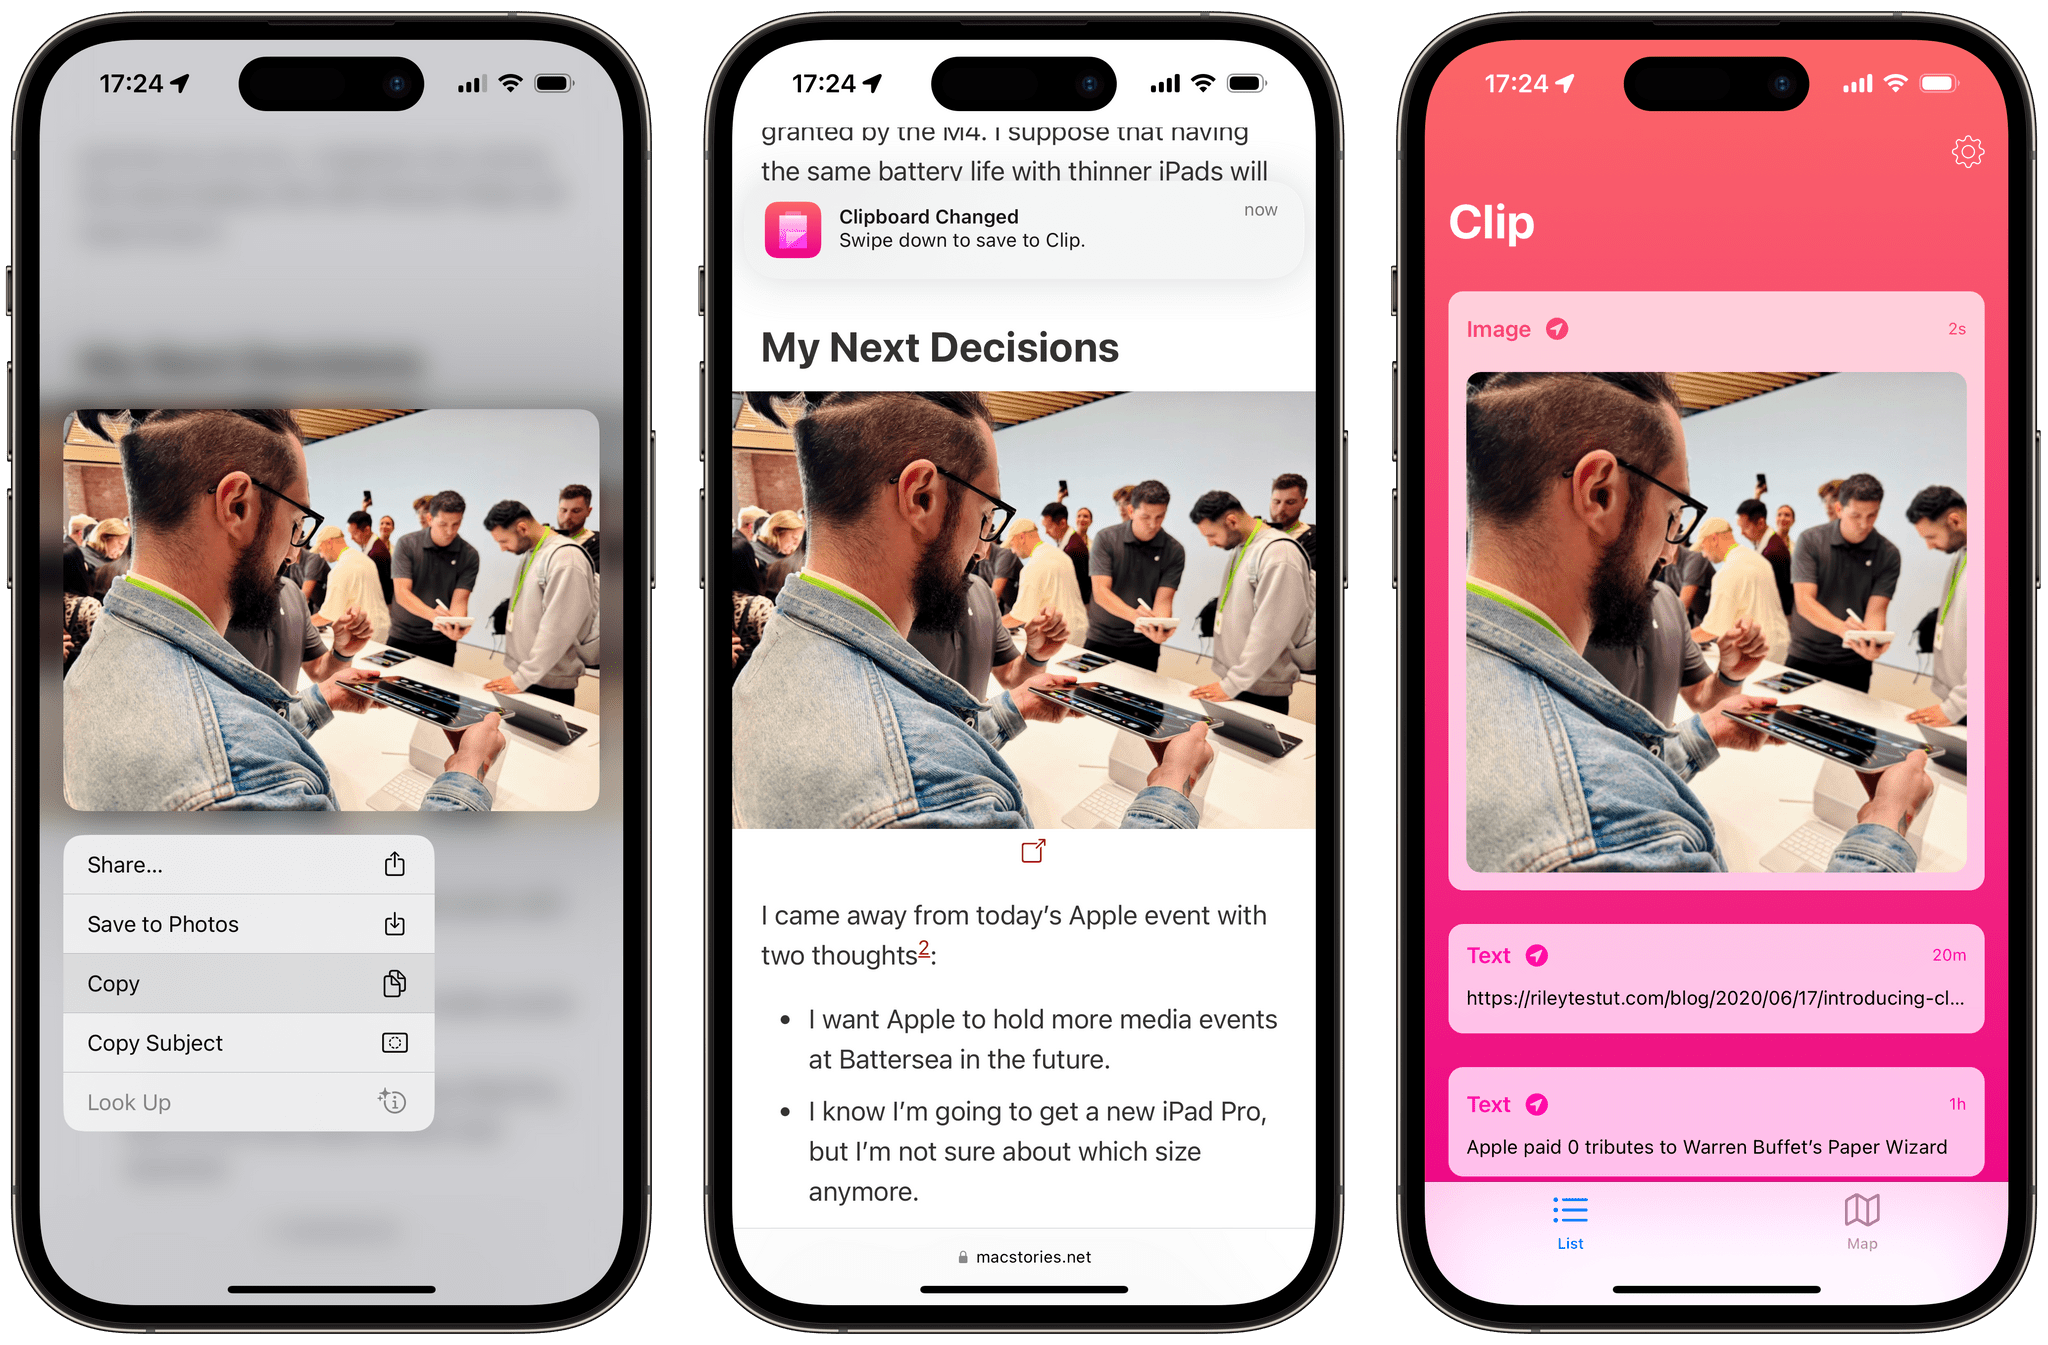 Clip sends you a notification every time you copy something on iOS. Simply swipe down on the notification to add it to Clip without leaving the app you're in. It even works with images.